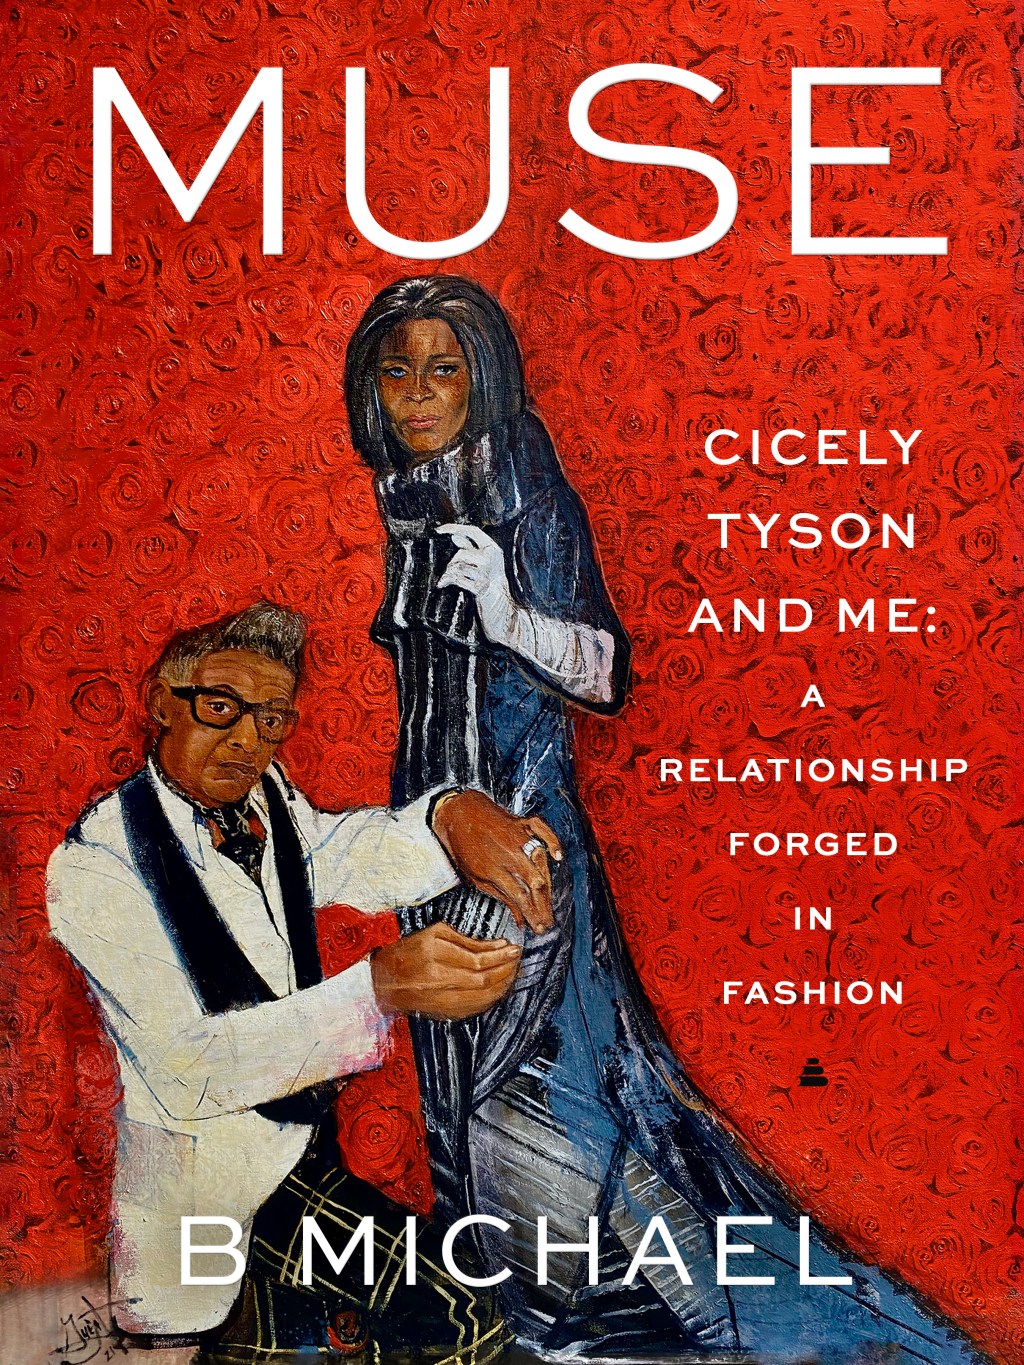 ‘muse’-tells-the-story-of-cicely-tyson,-and-fashion-designer-b-michael-is-committing-some-proceeds-to charity